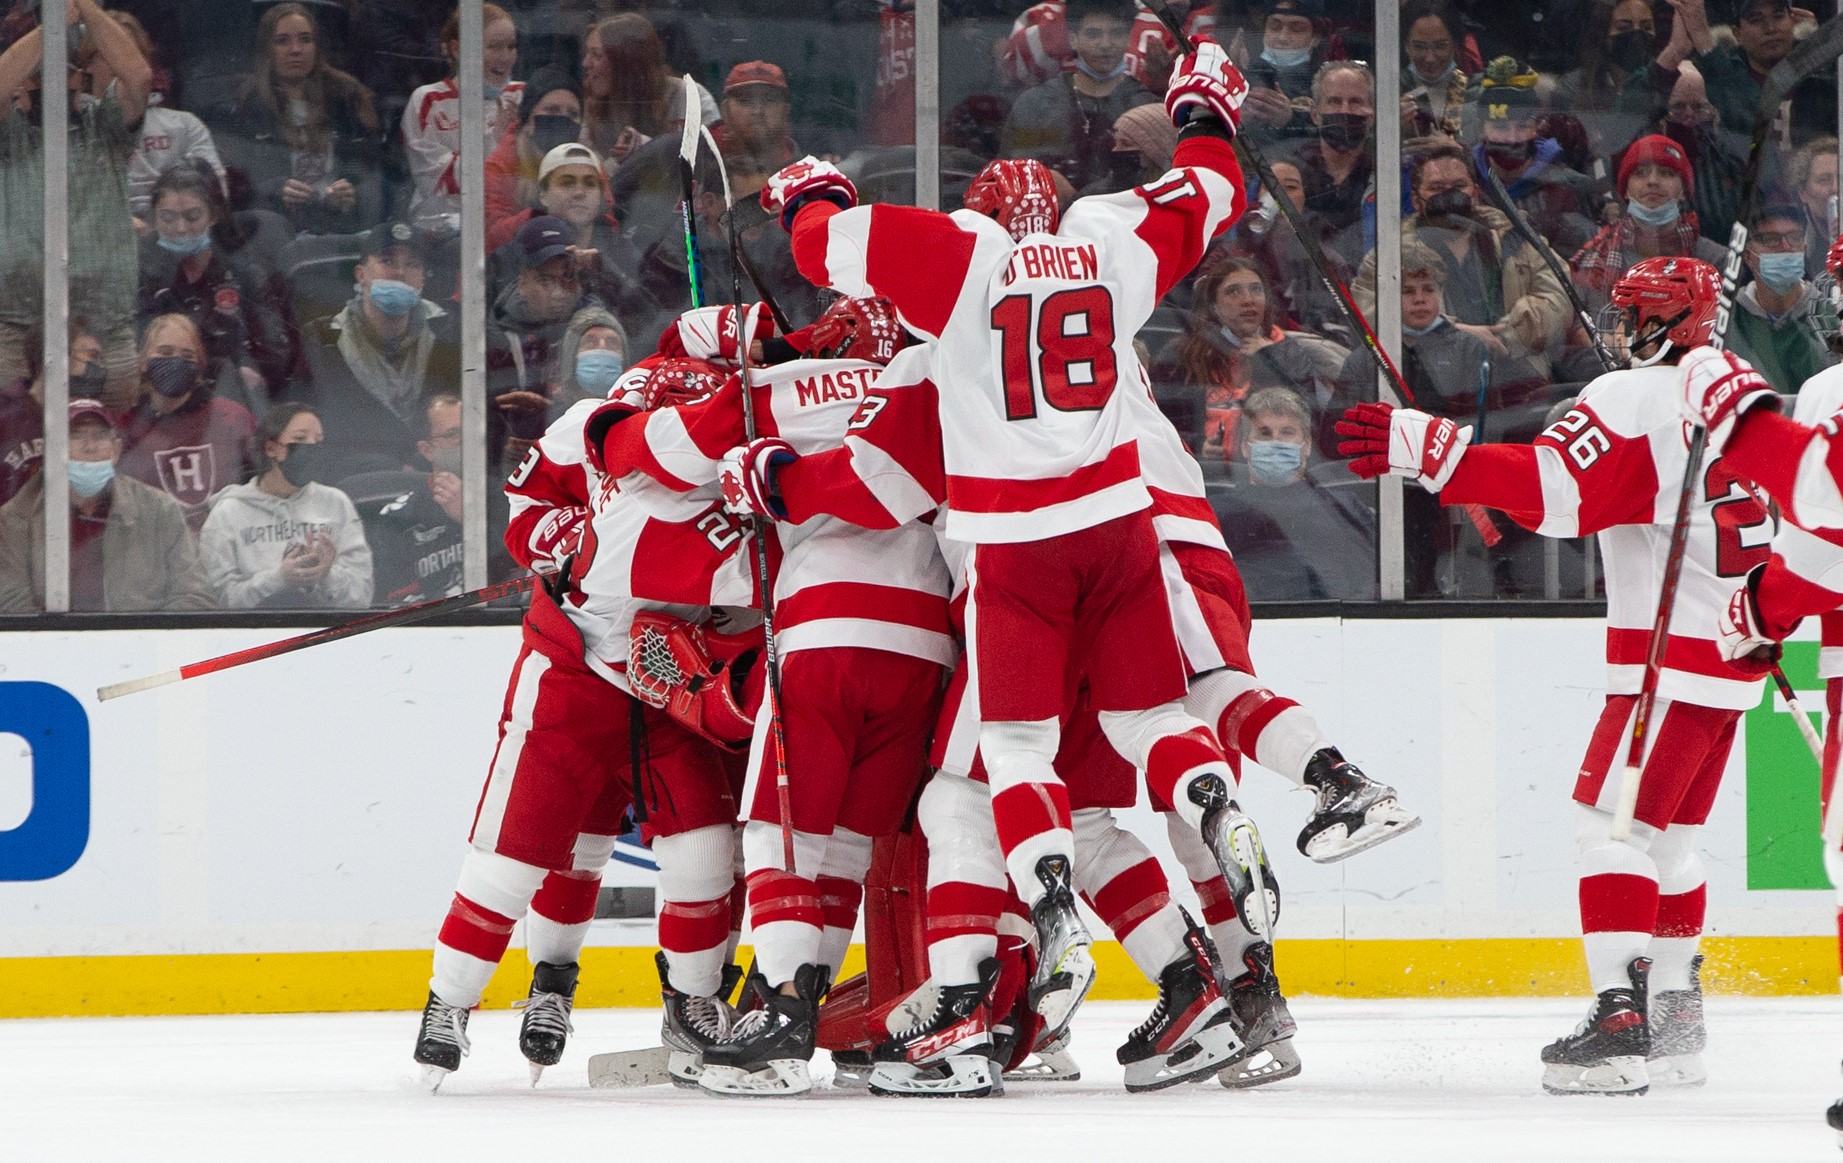 With Beanpot underway for 2022 edition, event lends itself to college hockey getting back to pre-COVID times